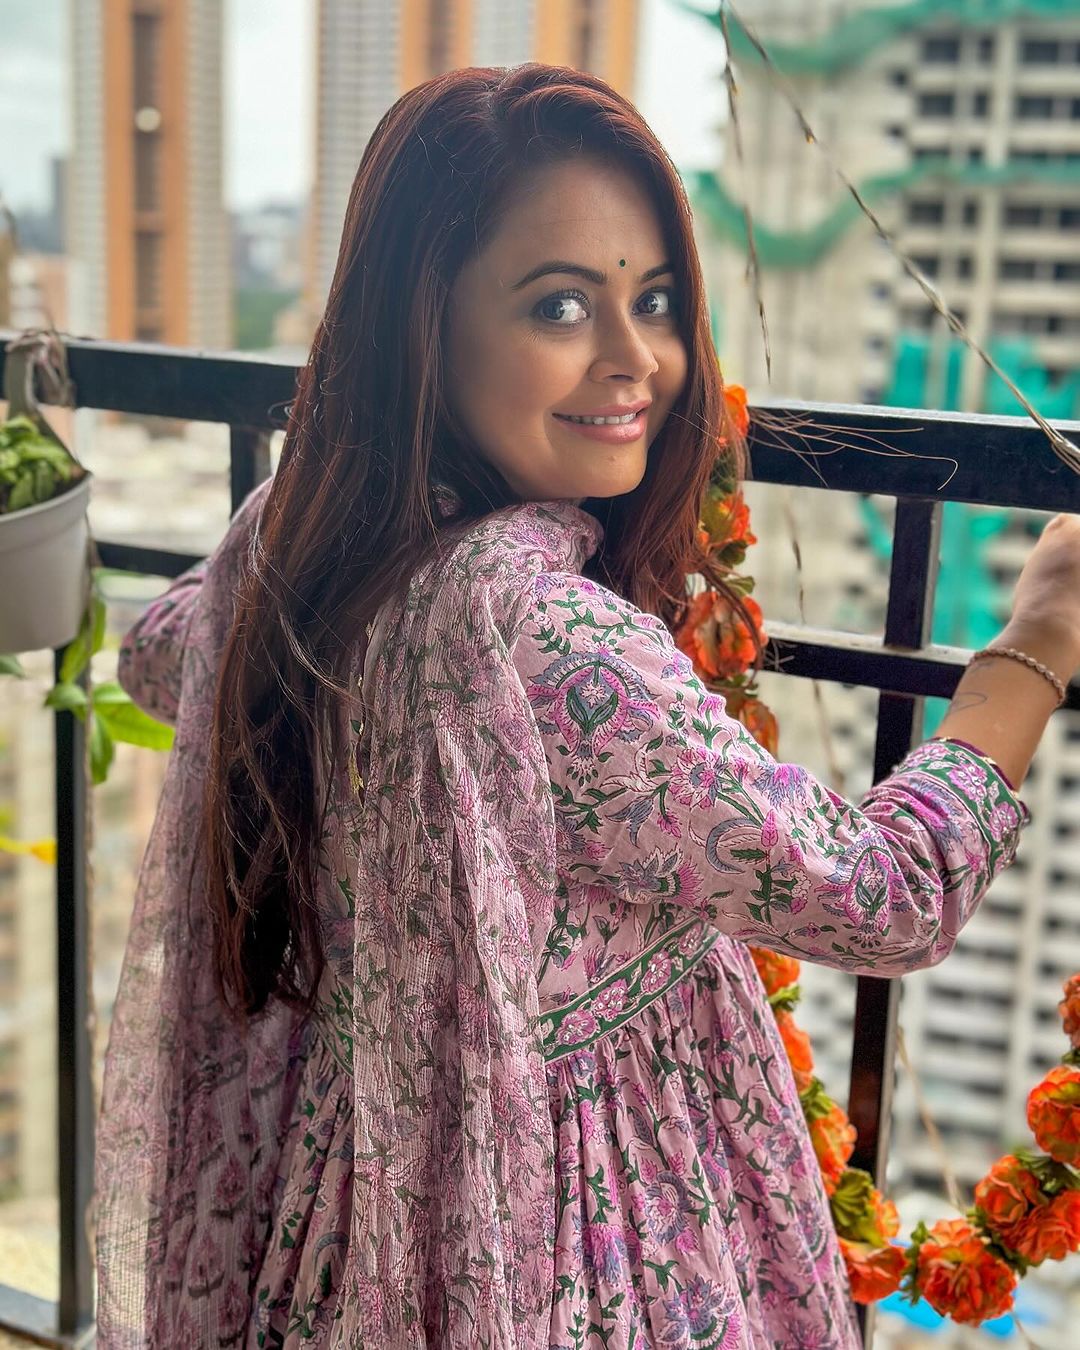 As Happy As Larry! Devoleena Bhattacharjee Completes 13 Years In The Entertainment Industry. Does She Celebrate This Anniversary? Find Out Here!